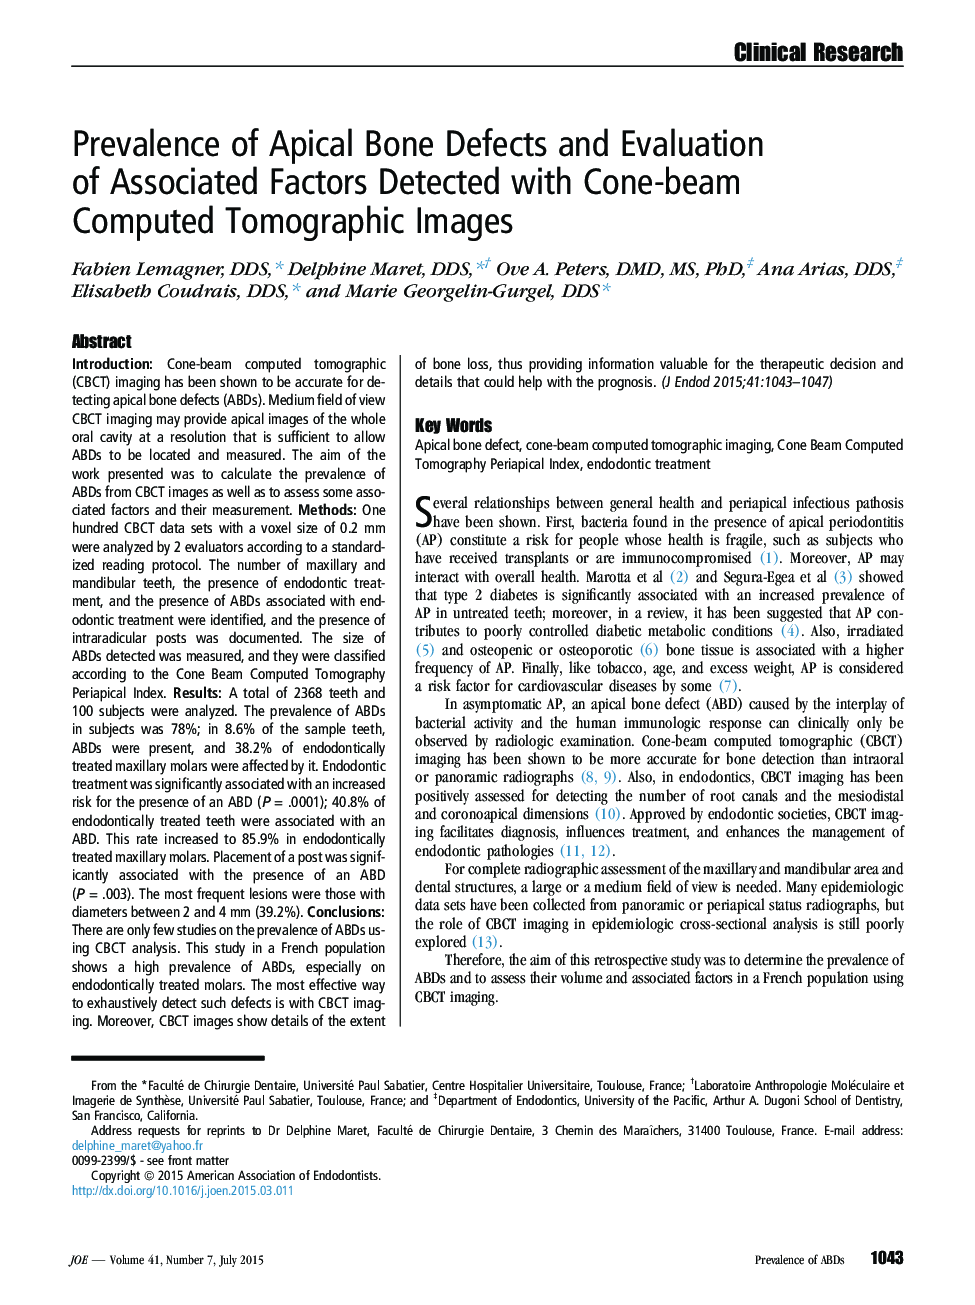 Prevalence of Apical Bone Defects and Evaluation ofÂ Associated Factors Detected with Cone-beam ComputedÂ Tomographic Images